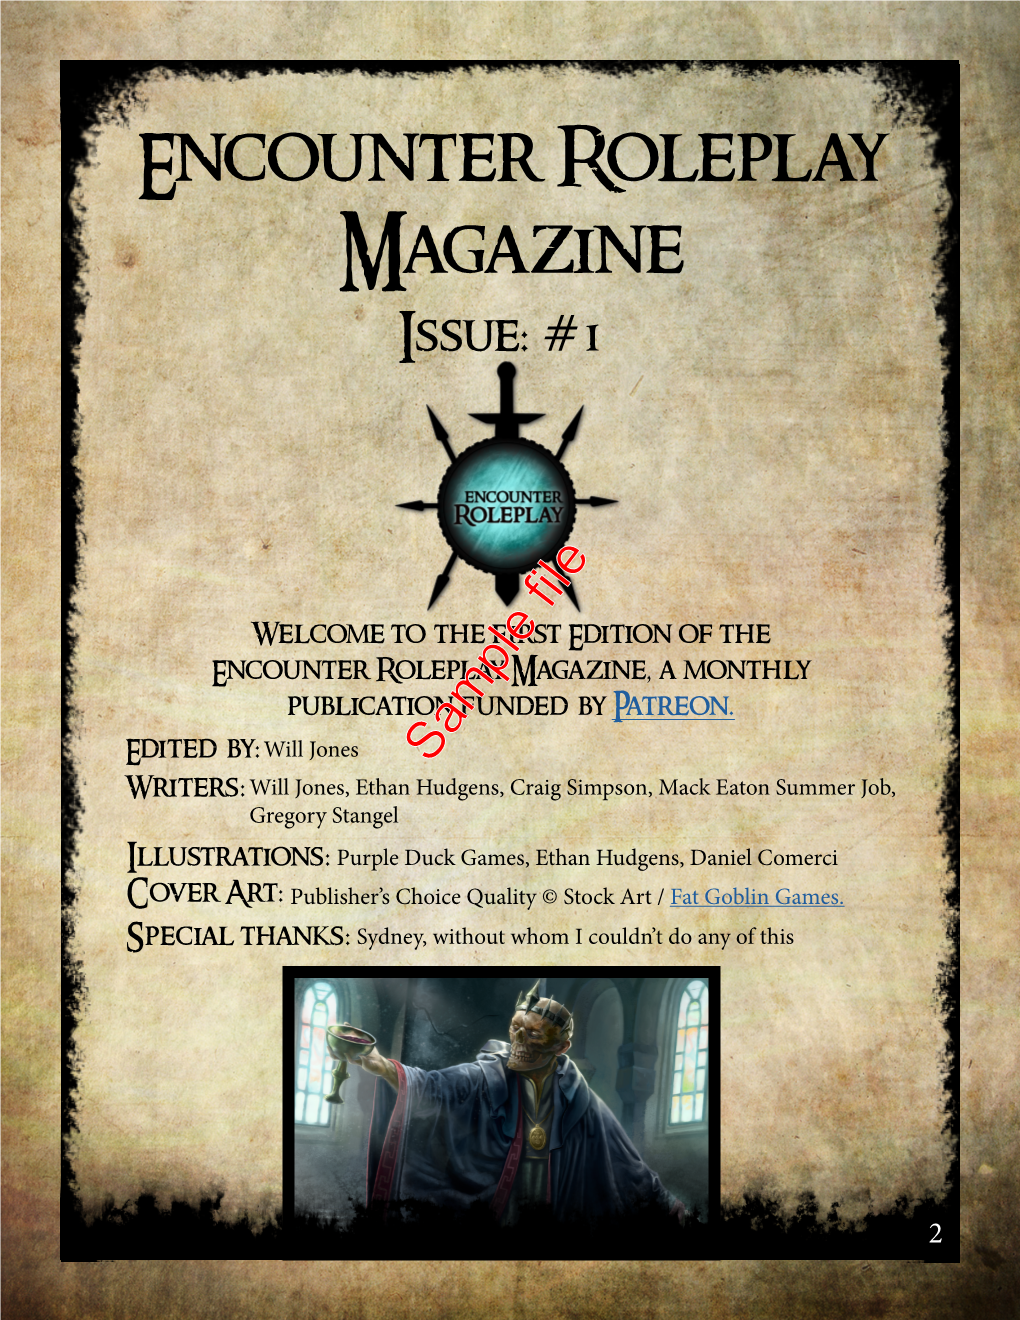 Encounter Roleplay Magazine Issue: #1